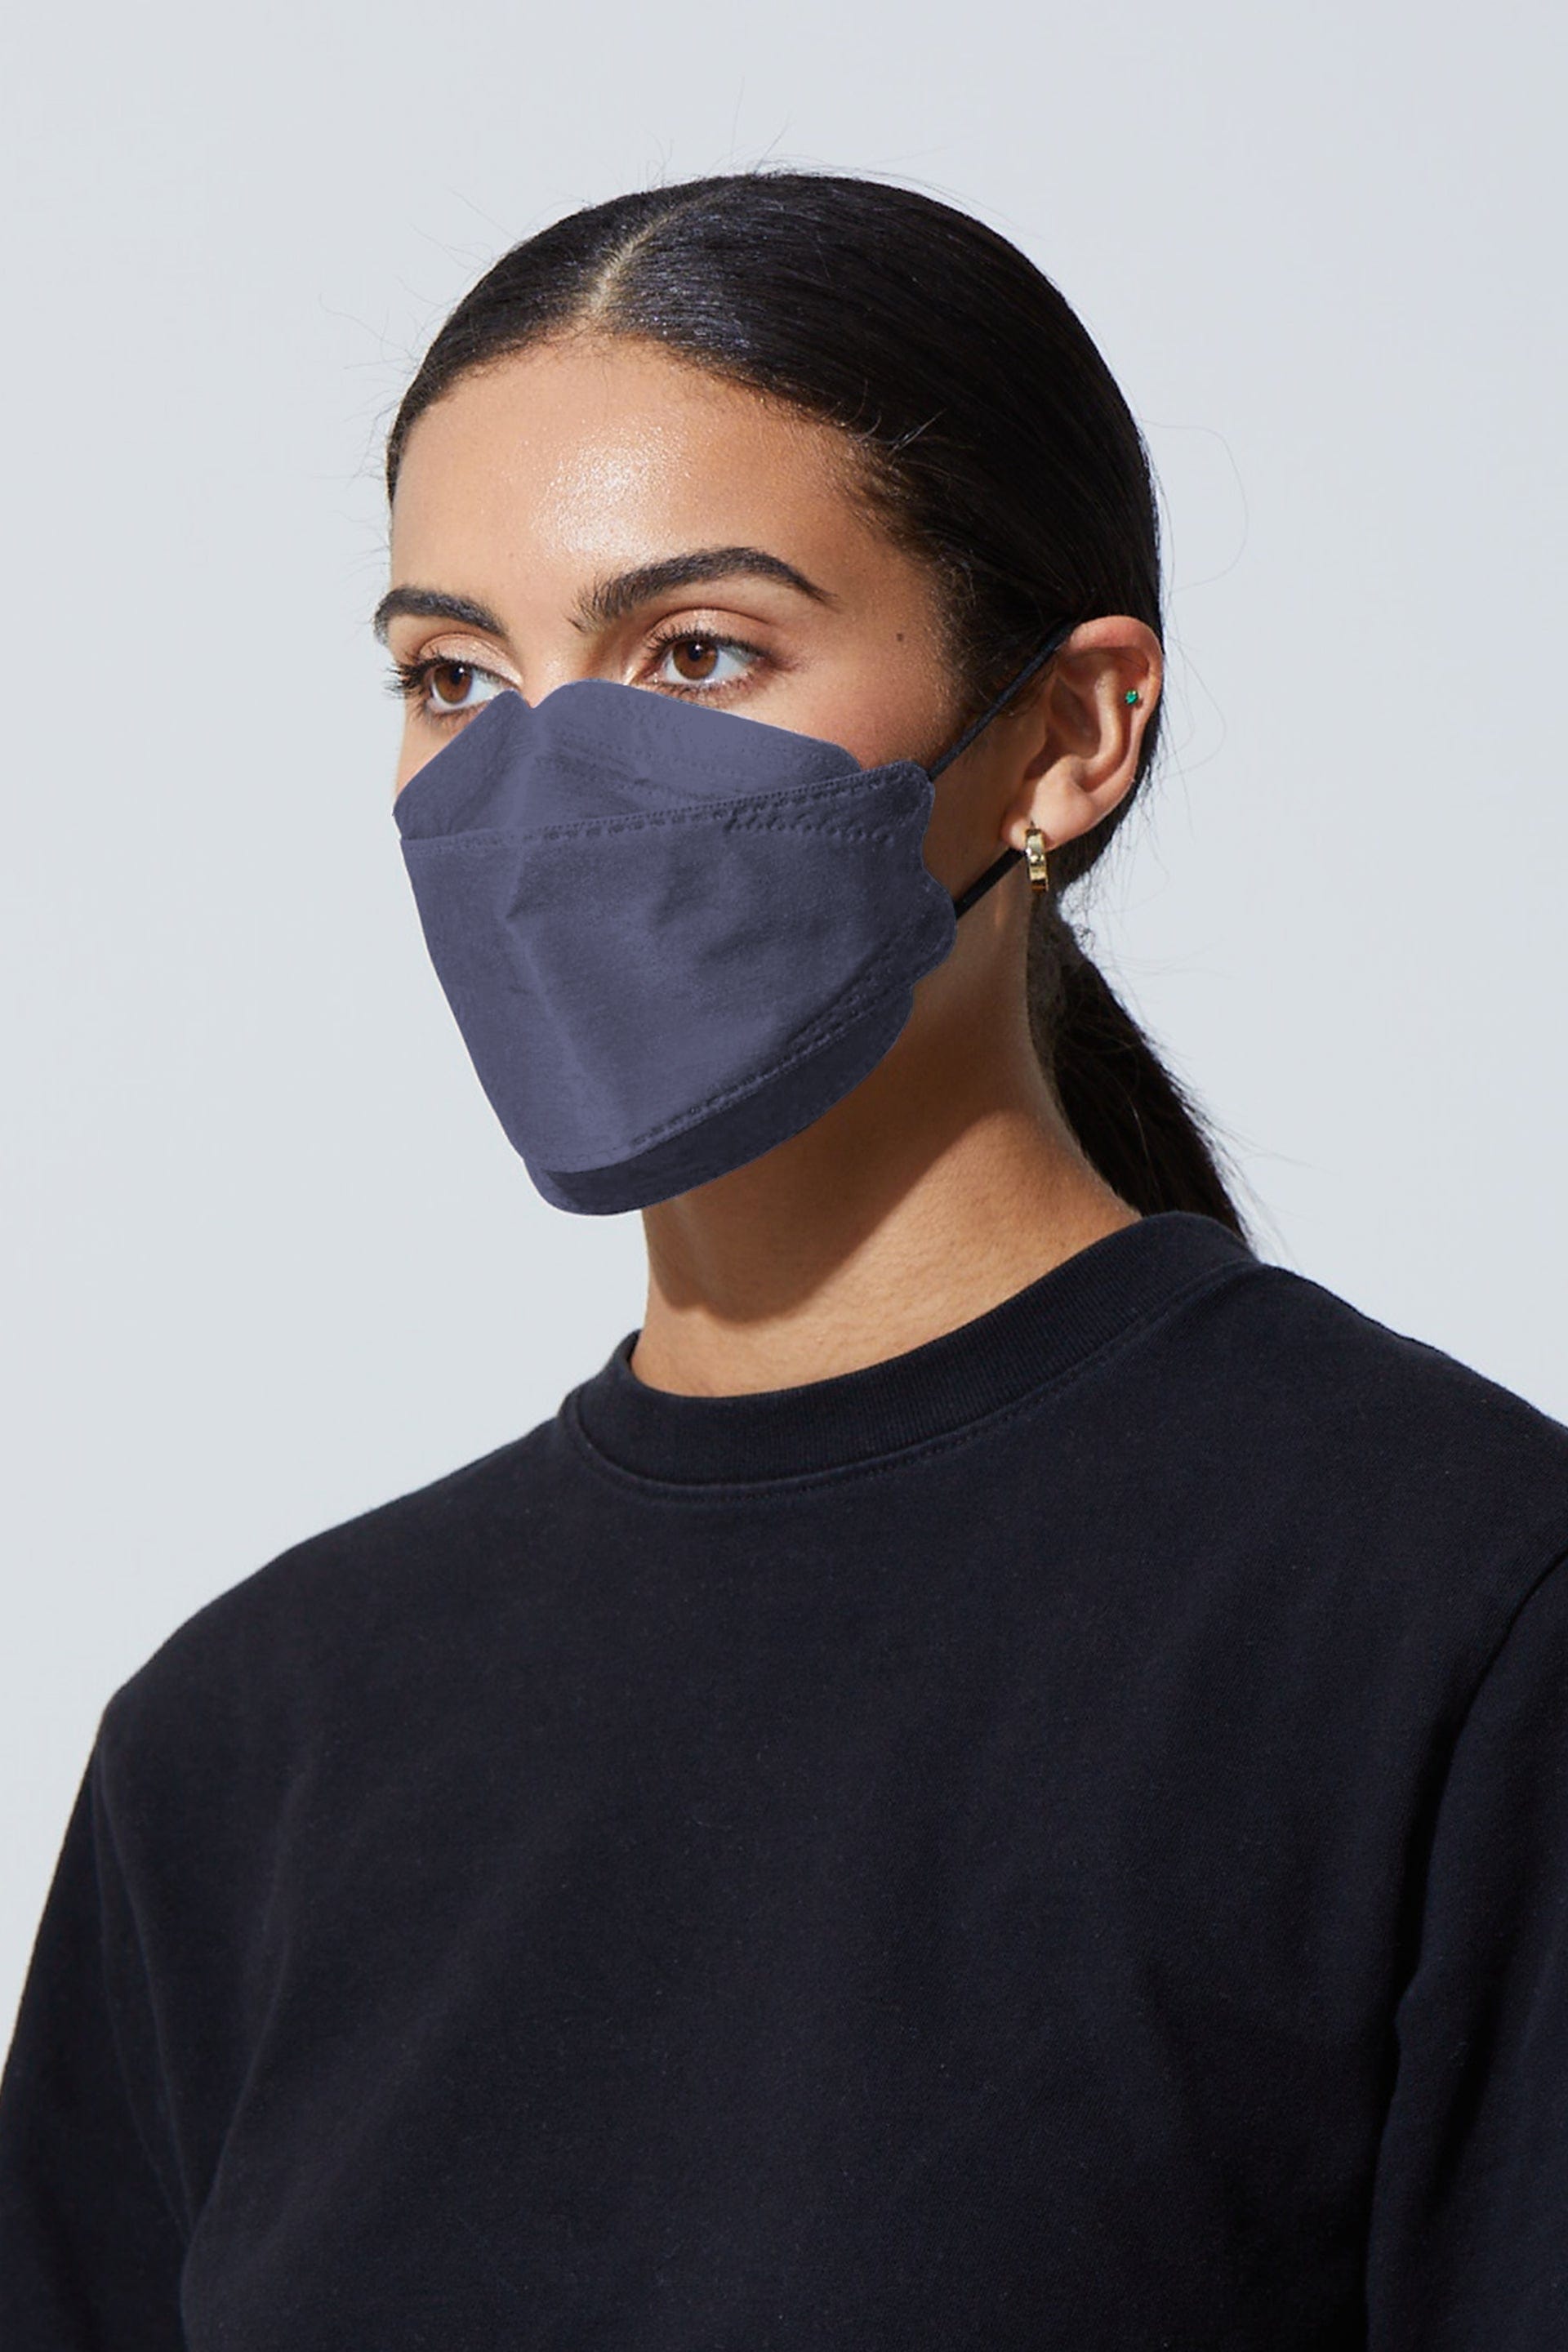 Woman wearing stylish Dark Blue KF94 face mask, with high quality breathable fabric. 